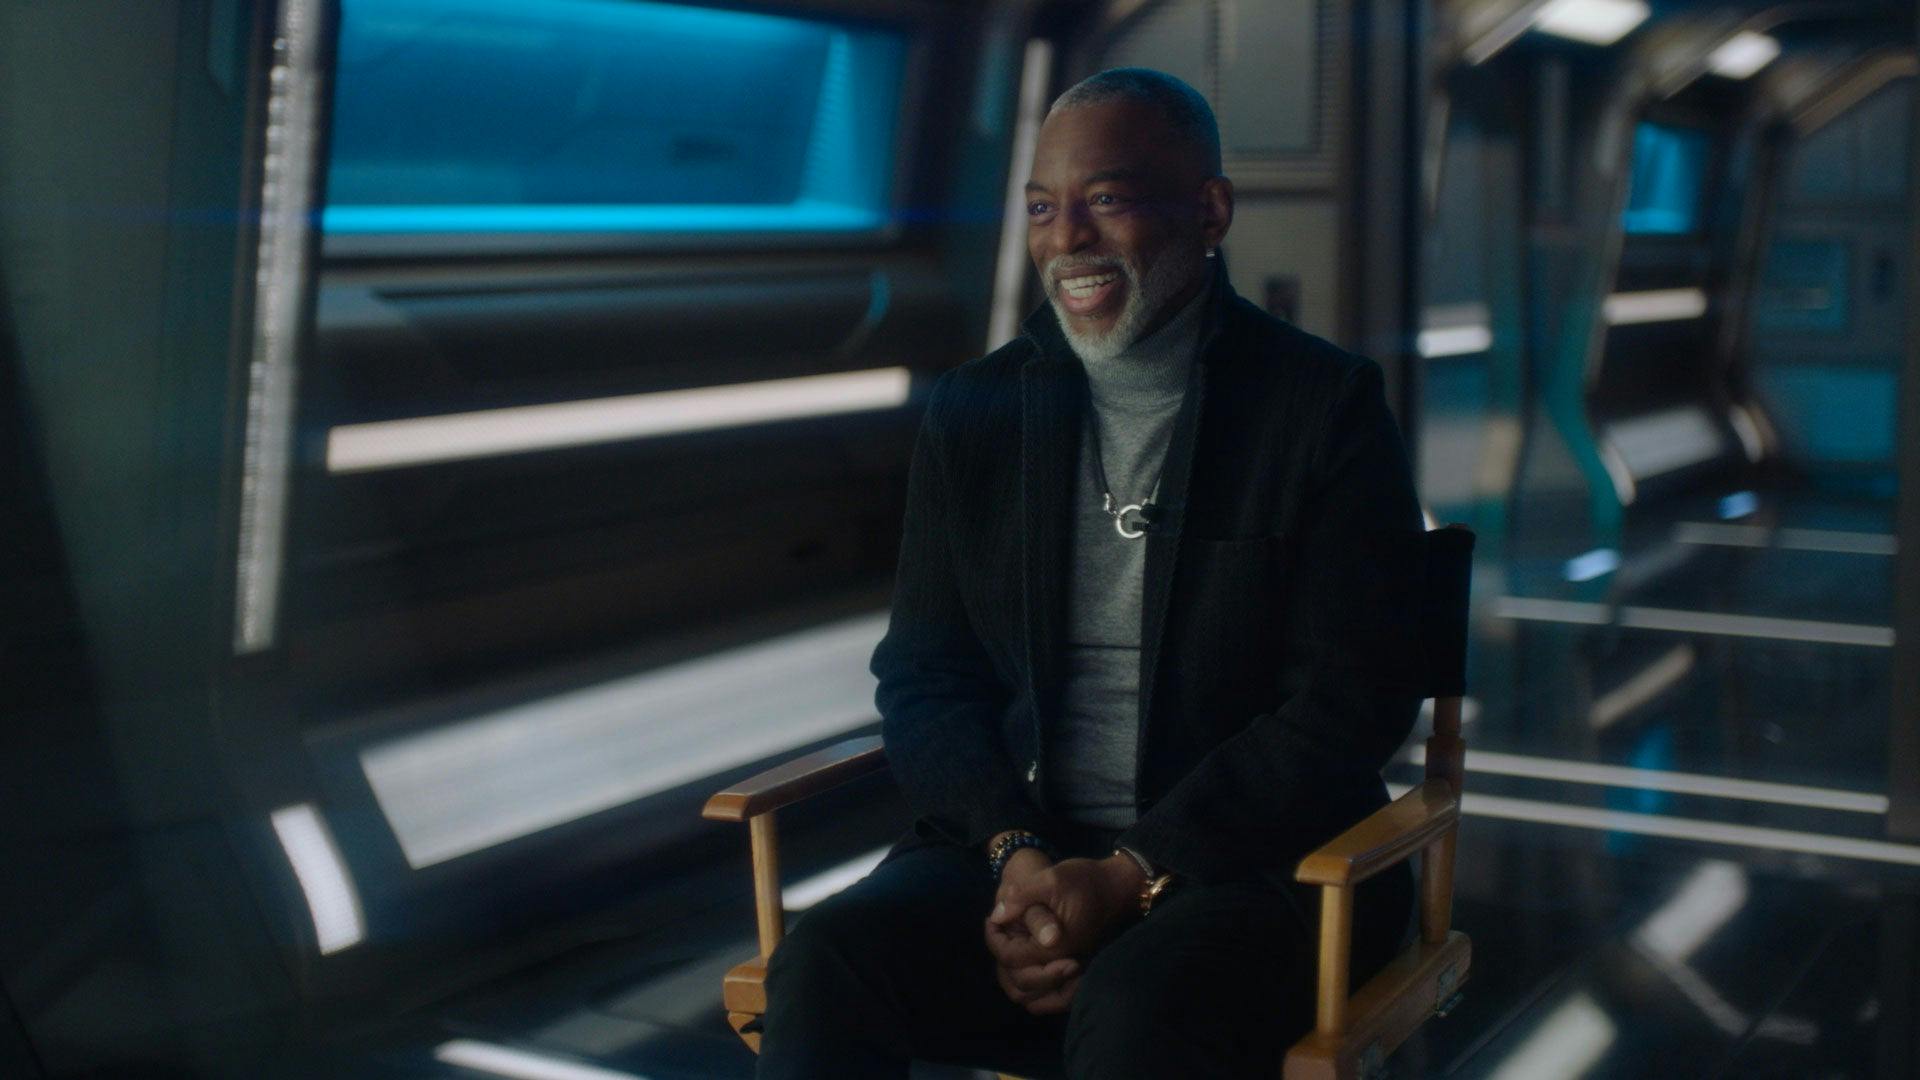 LeVar Burton on the set of Star Trek: Picard sitting in a tall director's chair and smiling